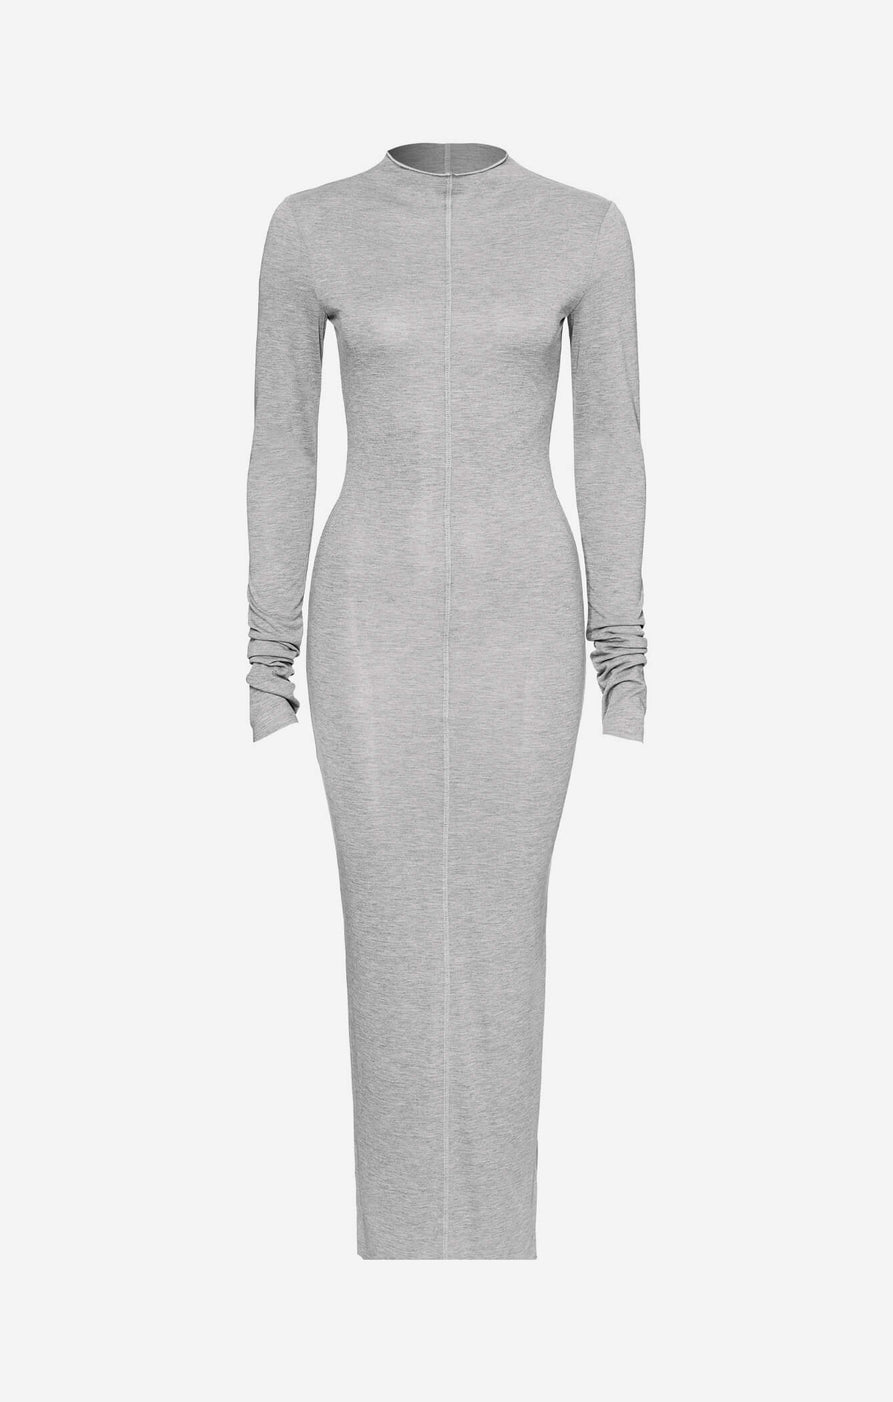 THE MODAL L/S MIDI DRESS - MID GREY – All Things Golden